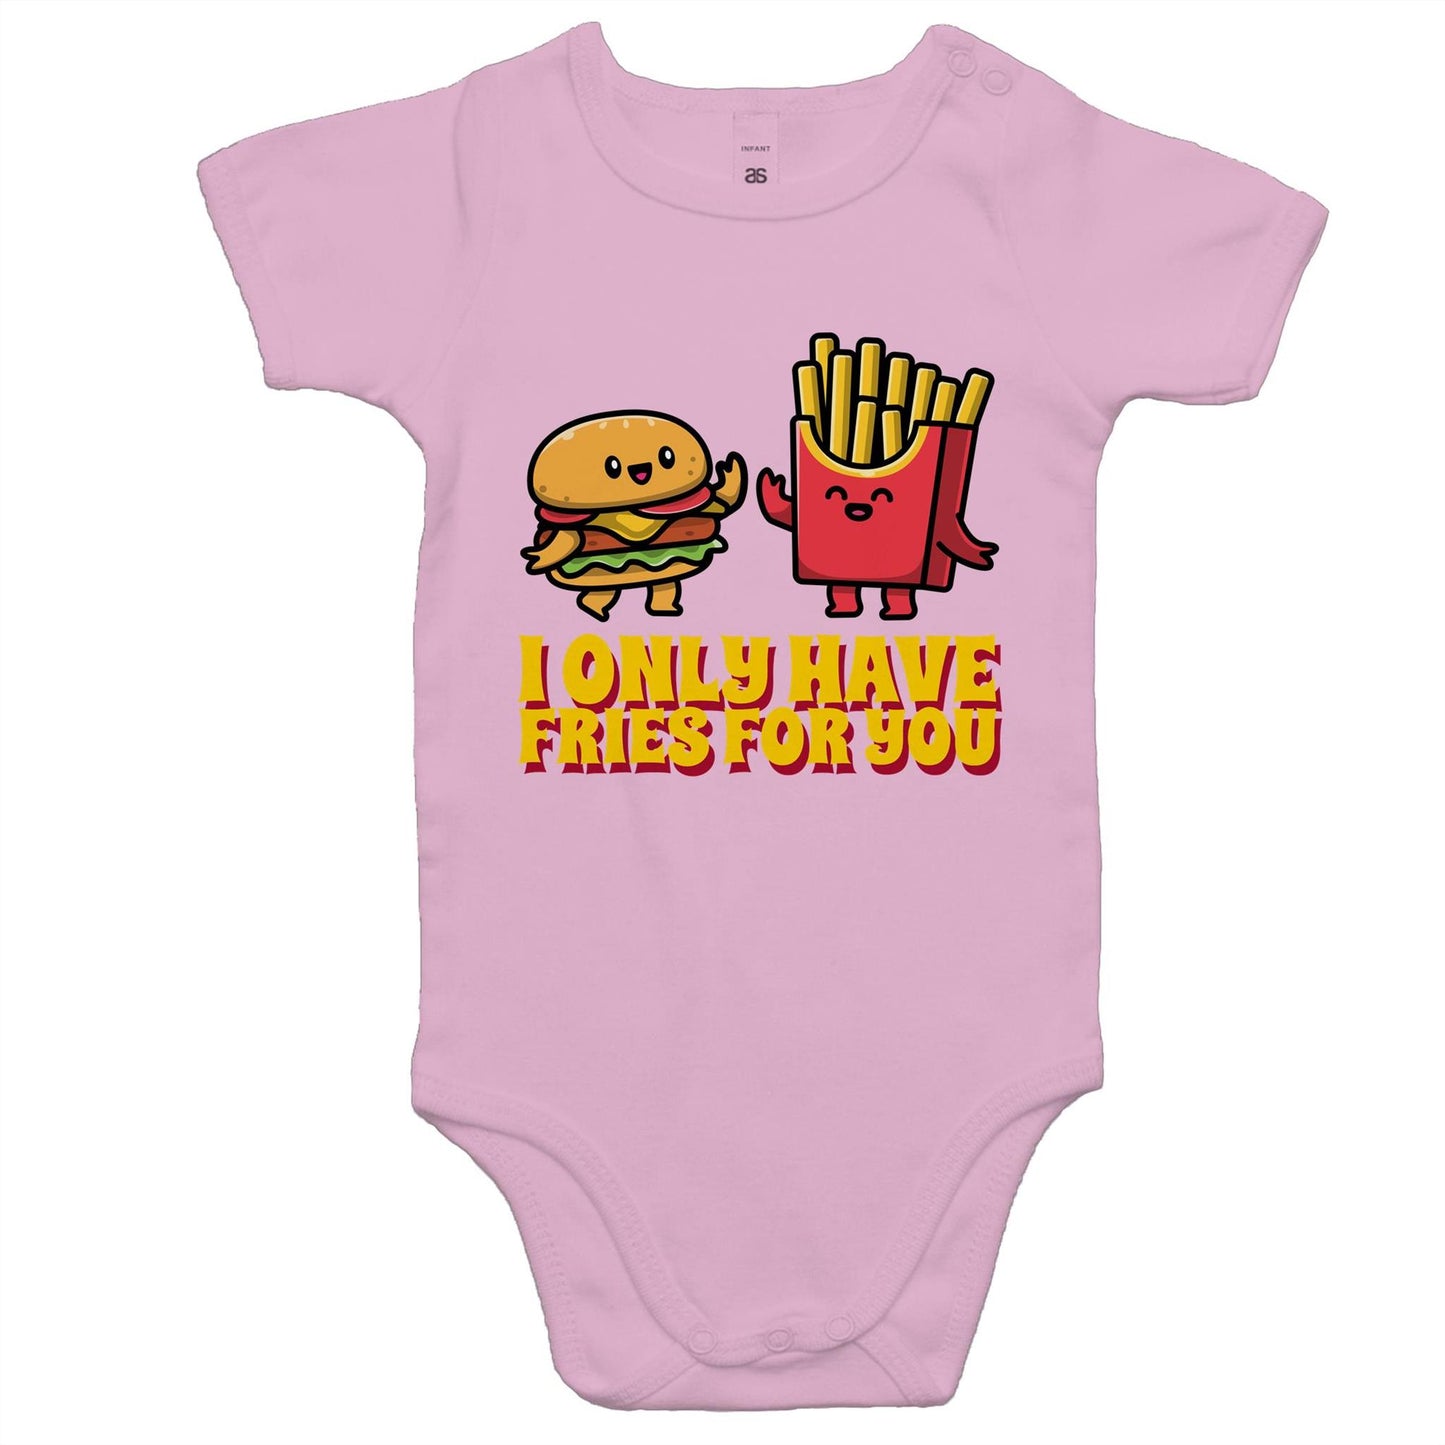 I Only Have Fries For You, Burger And Fries - Baby Bodysuit Pink Baby Bodysuit